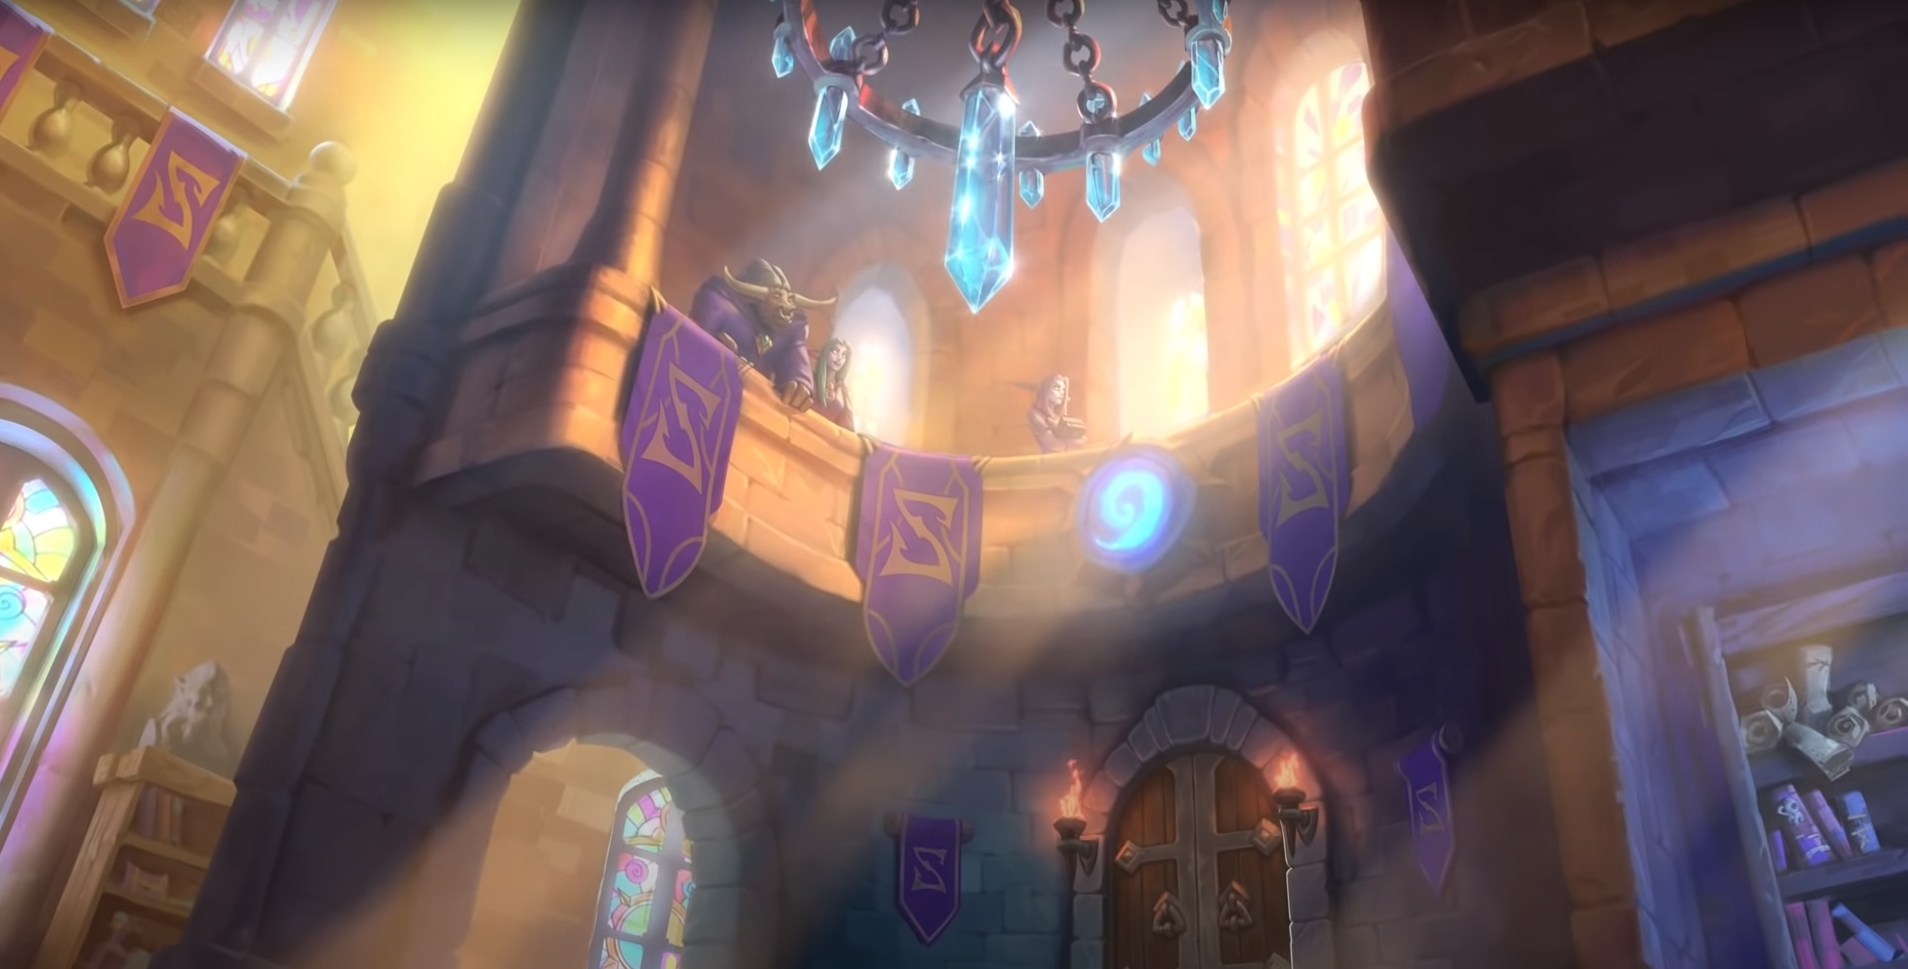 Blizzard Announces New Scholomance Academy Hearthstone Expansion, Based On World Of Warcraft’s Scholomance Dungeon